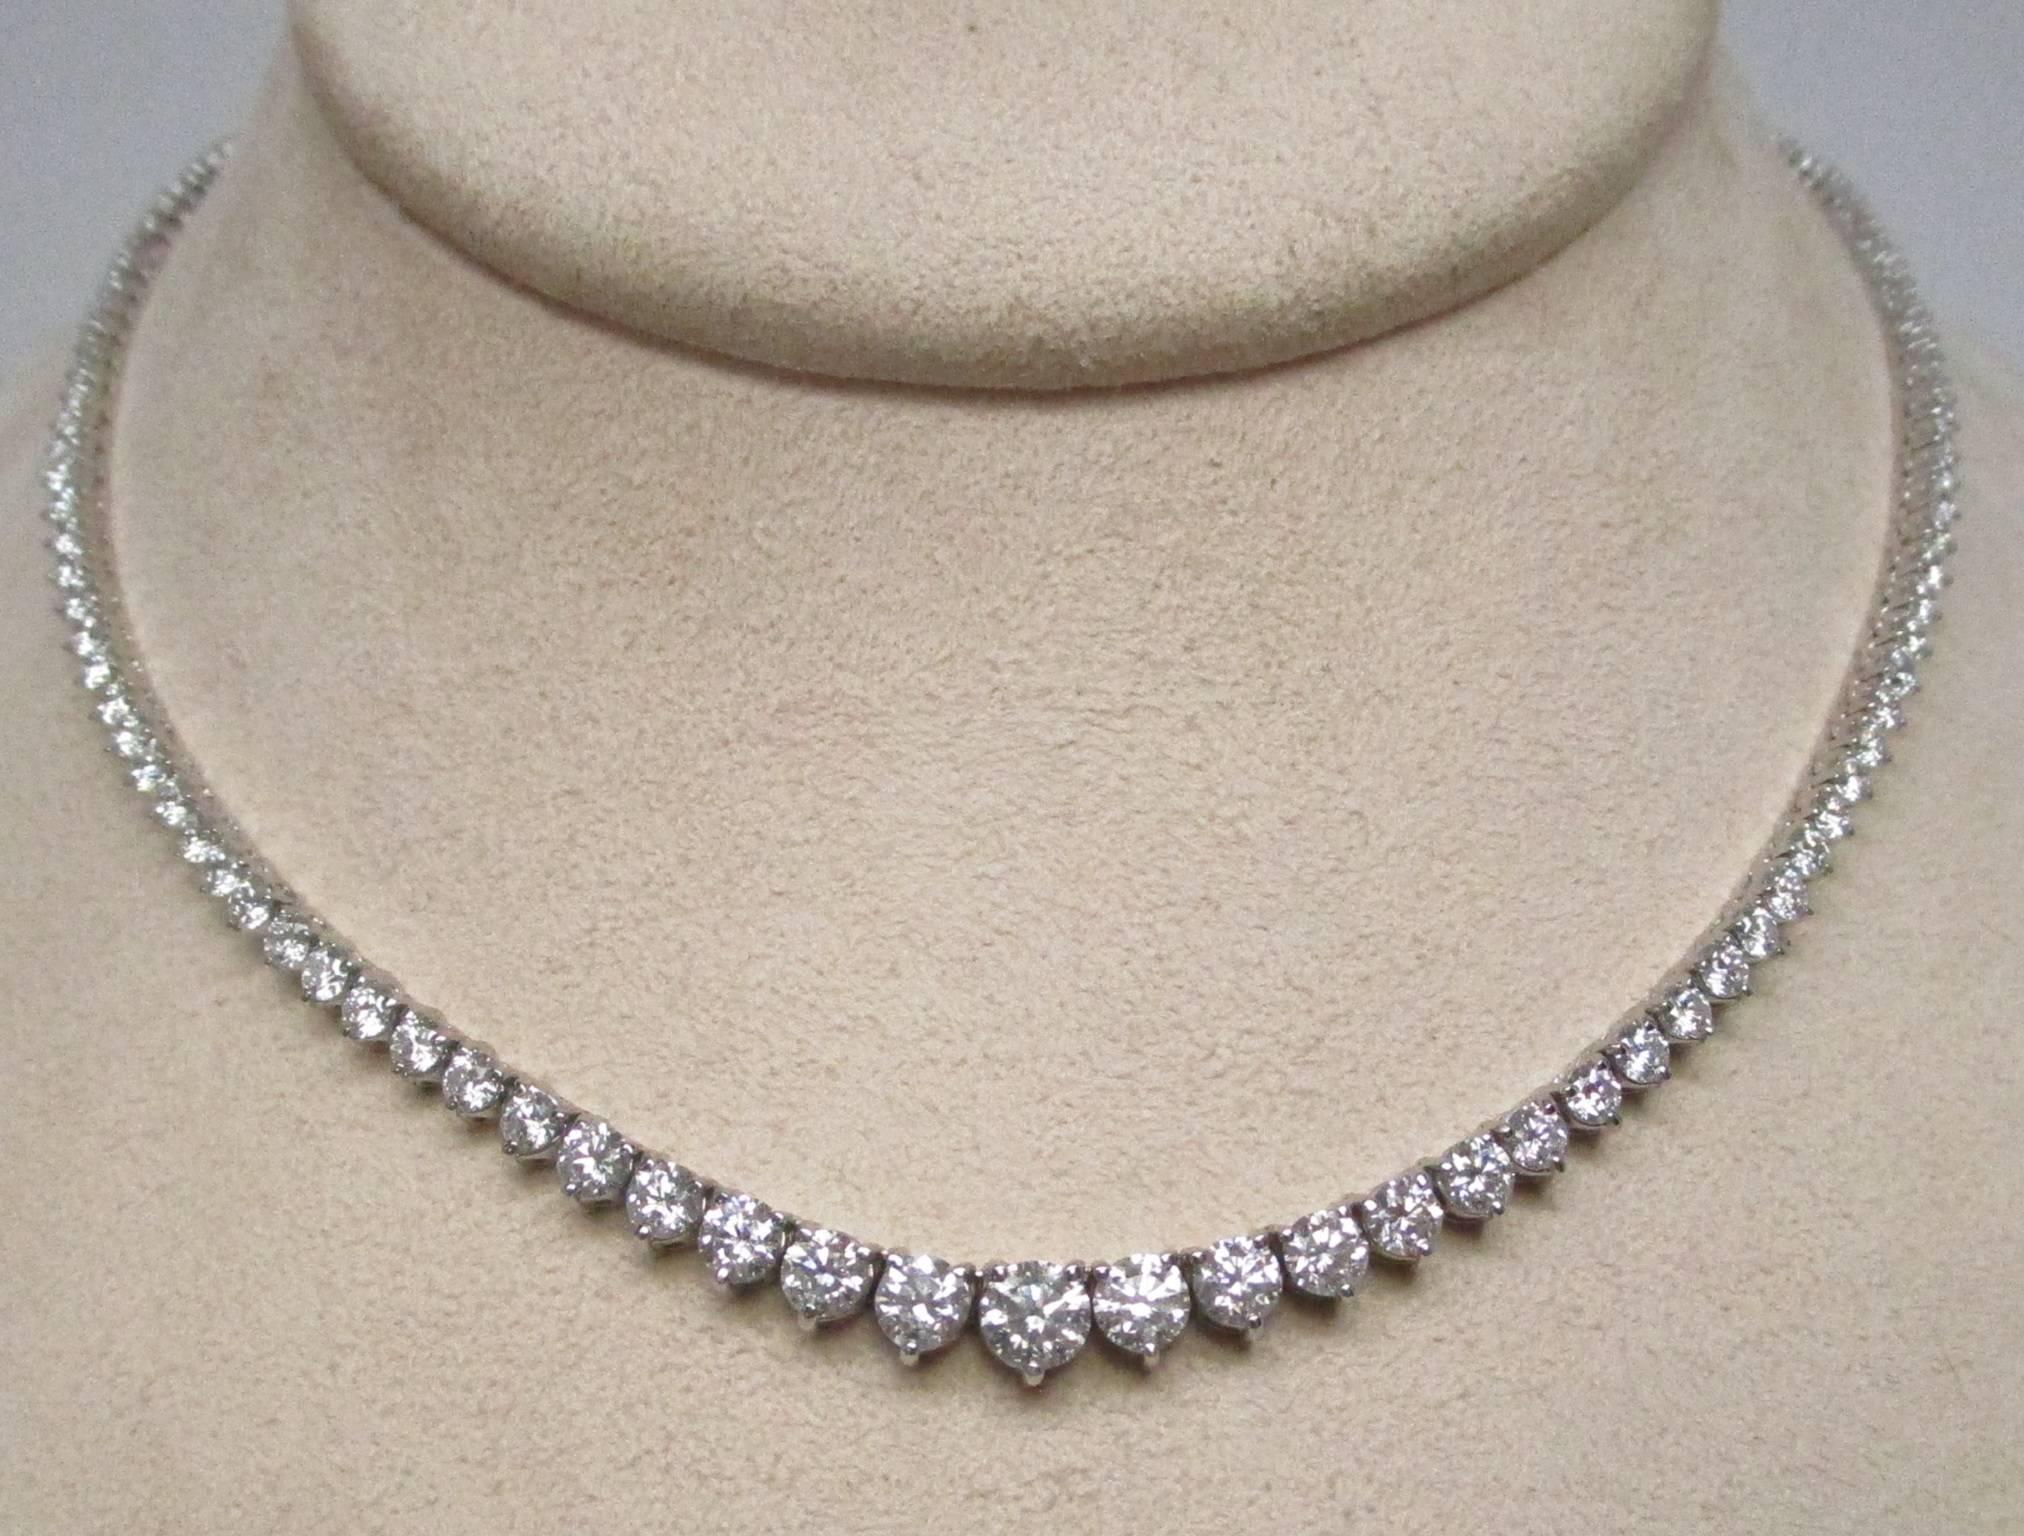 The Riviera 18K white gold necklace is the epitome of style and class. It evokes images of Audrey Hepburn in 